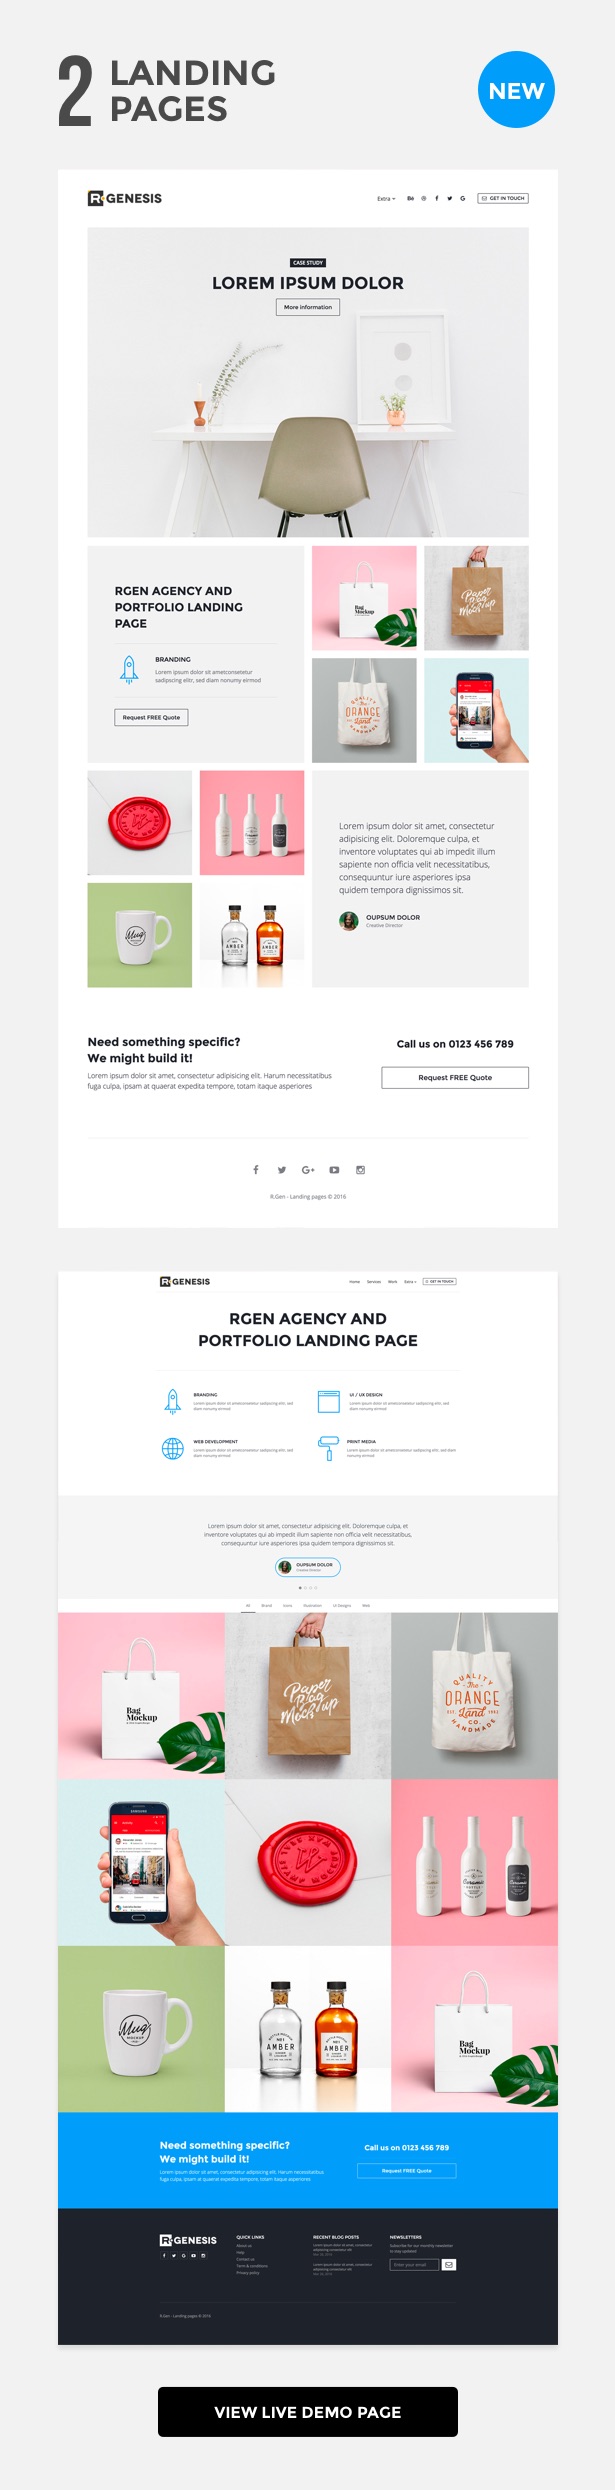 Rgen Agency Landing Pages